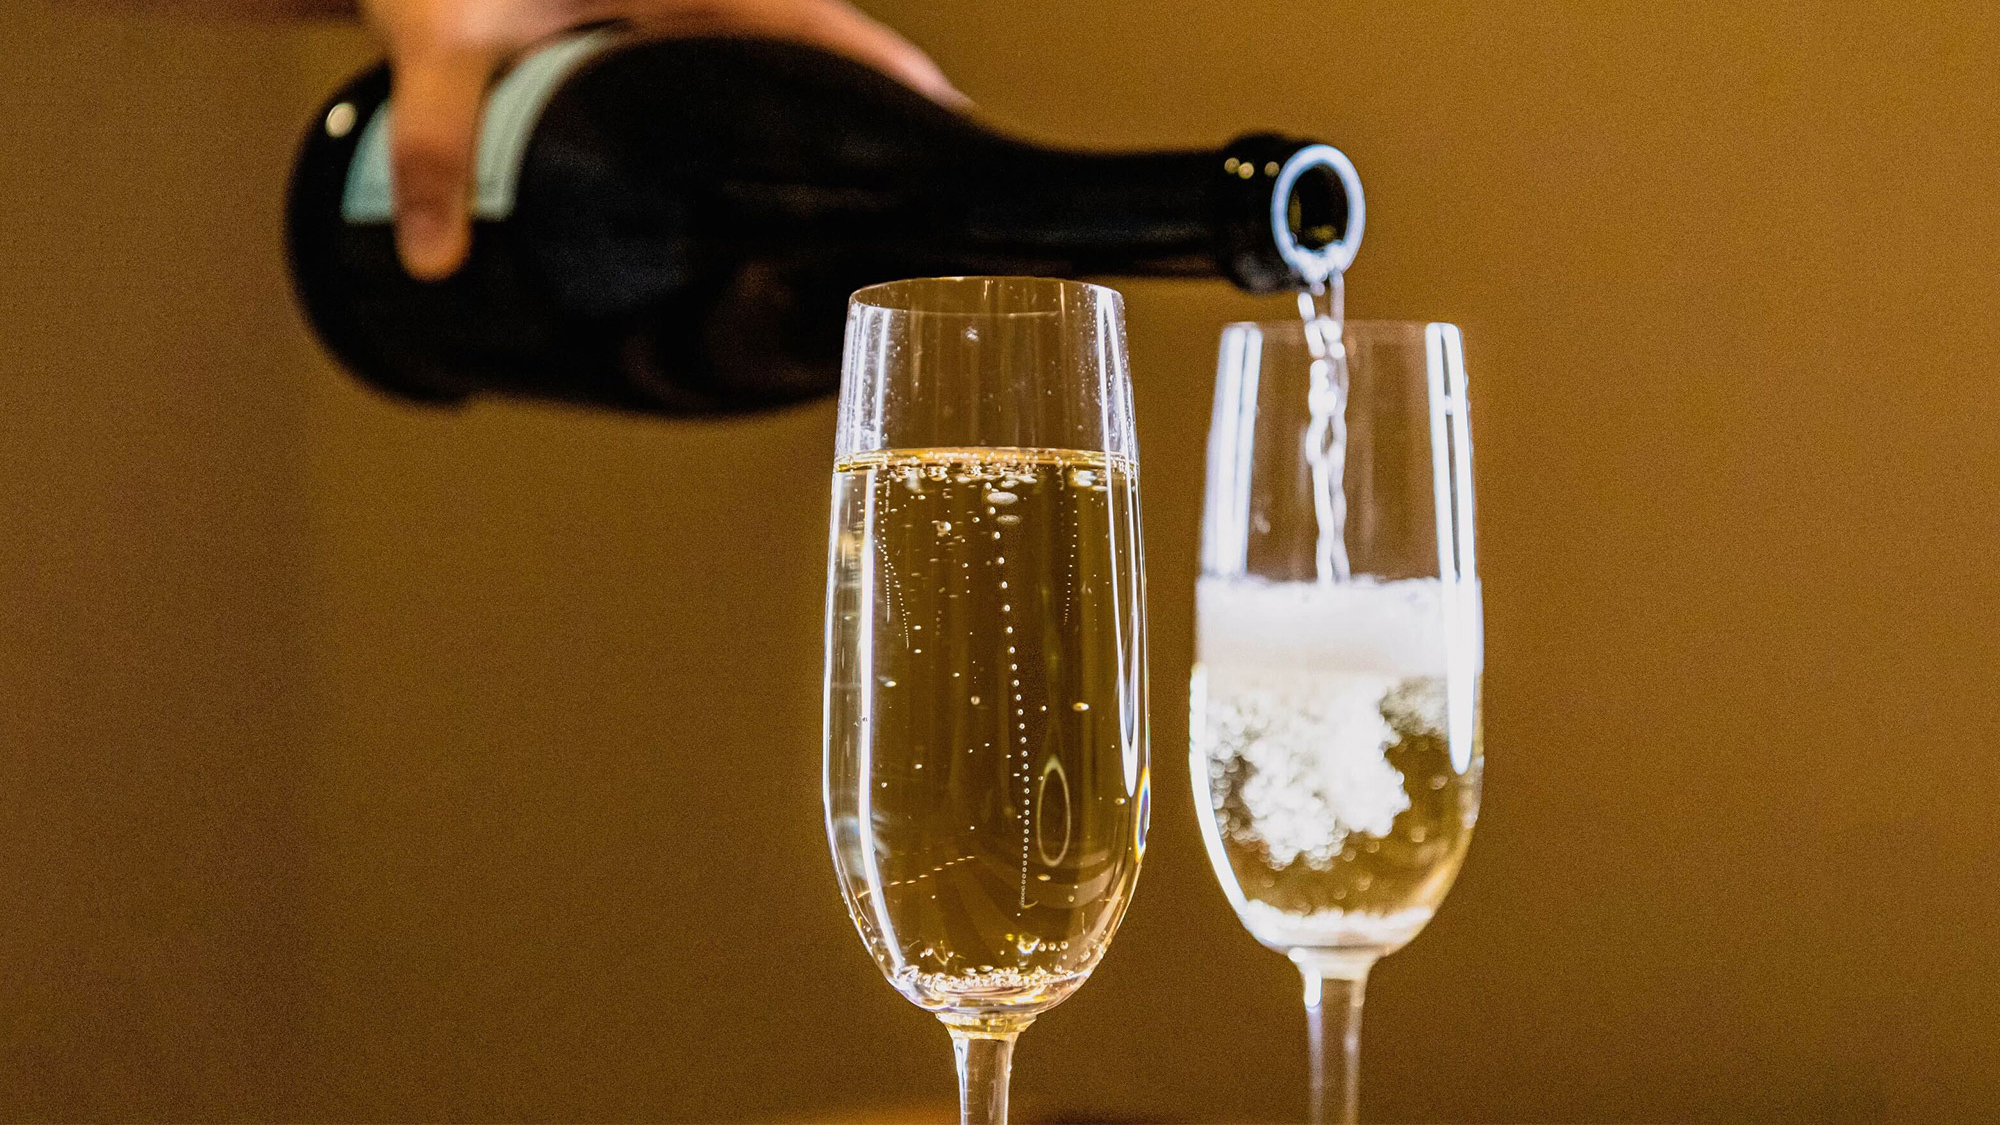 Champagne being poured into two glasses.